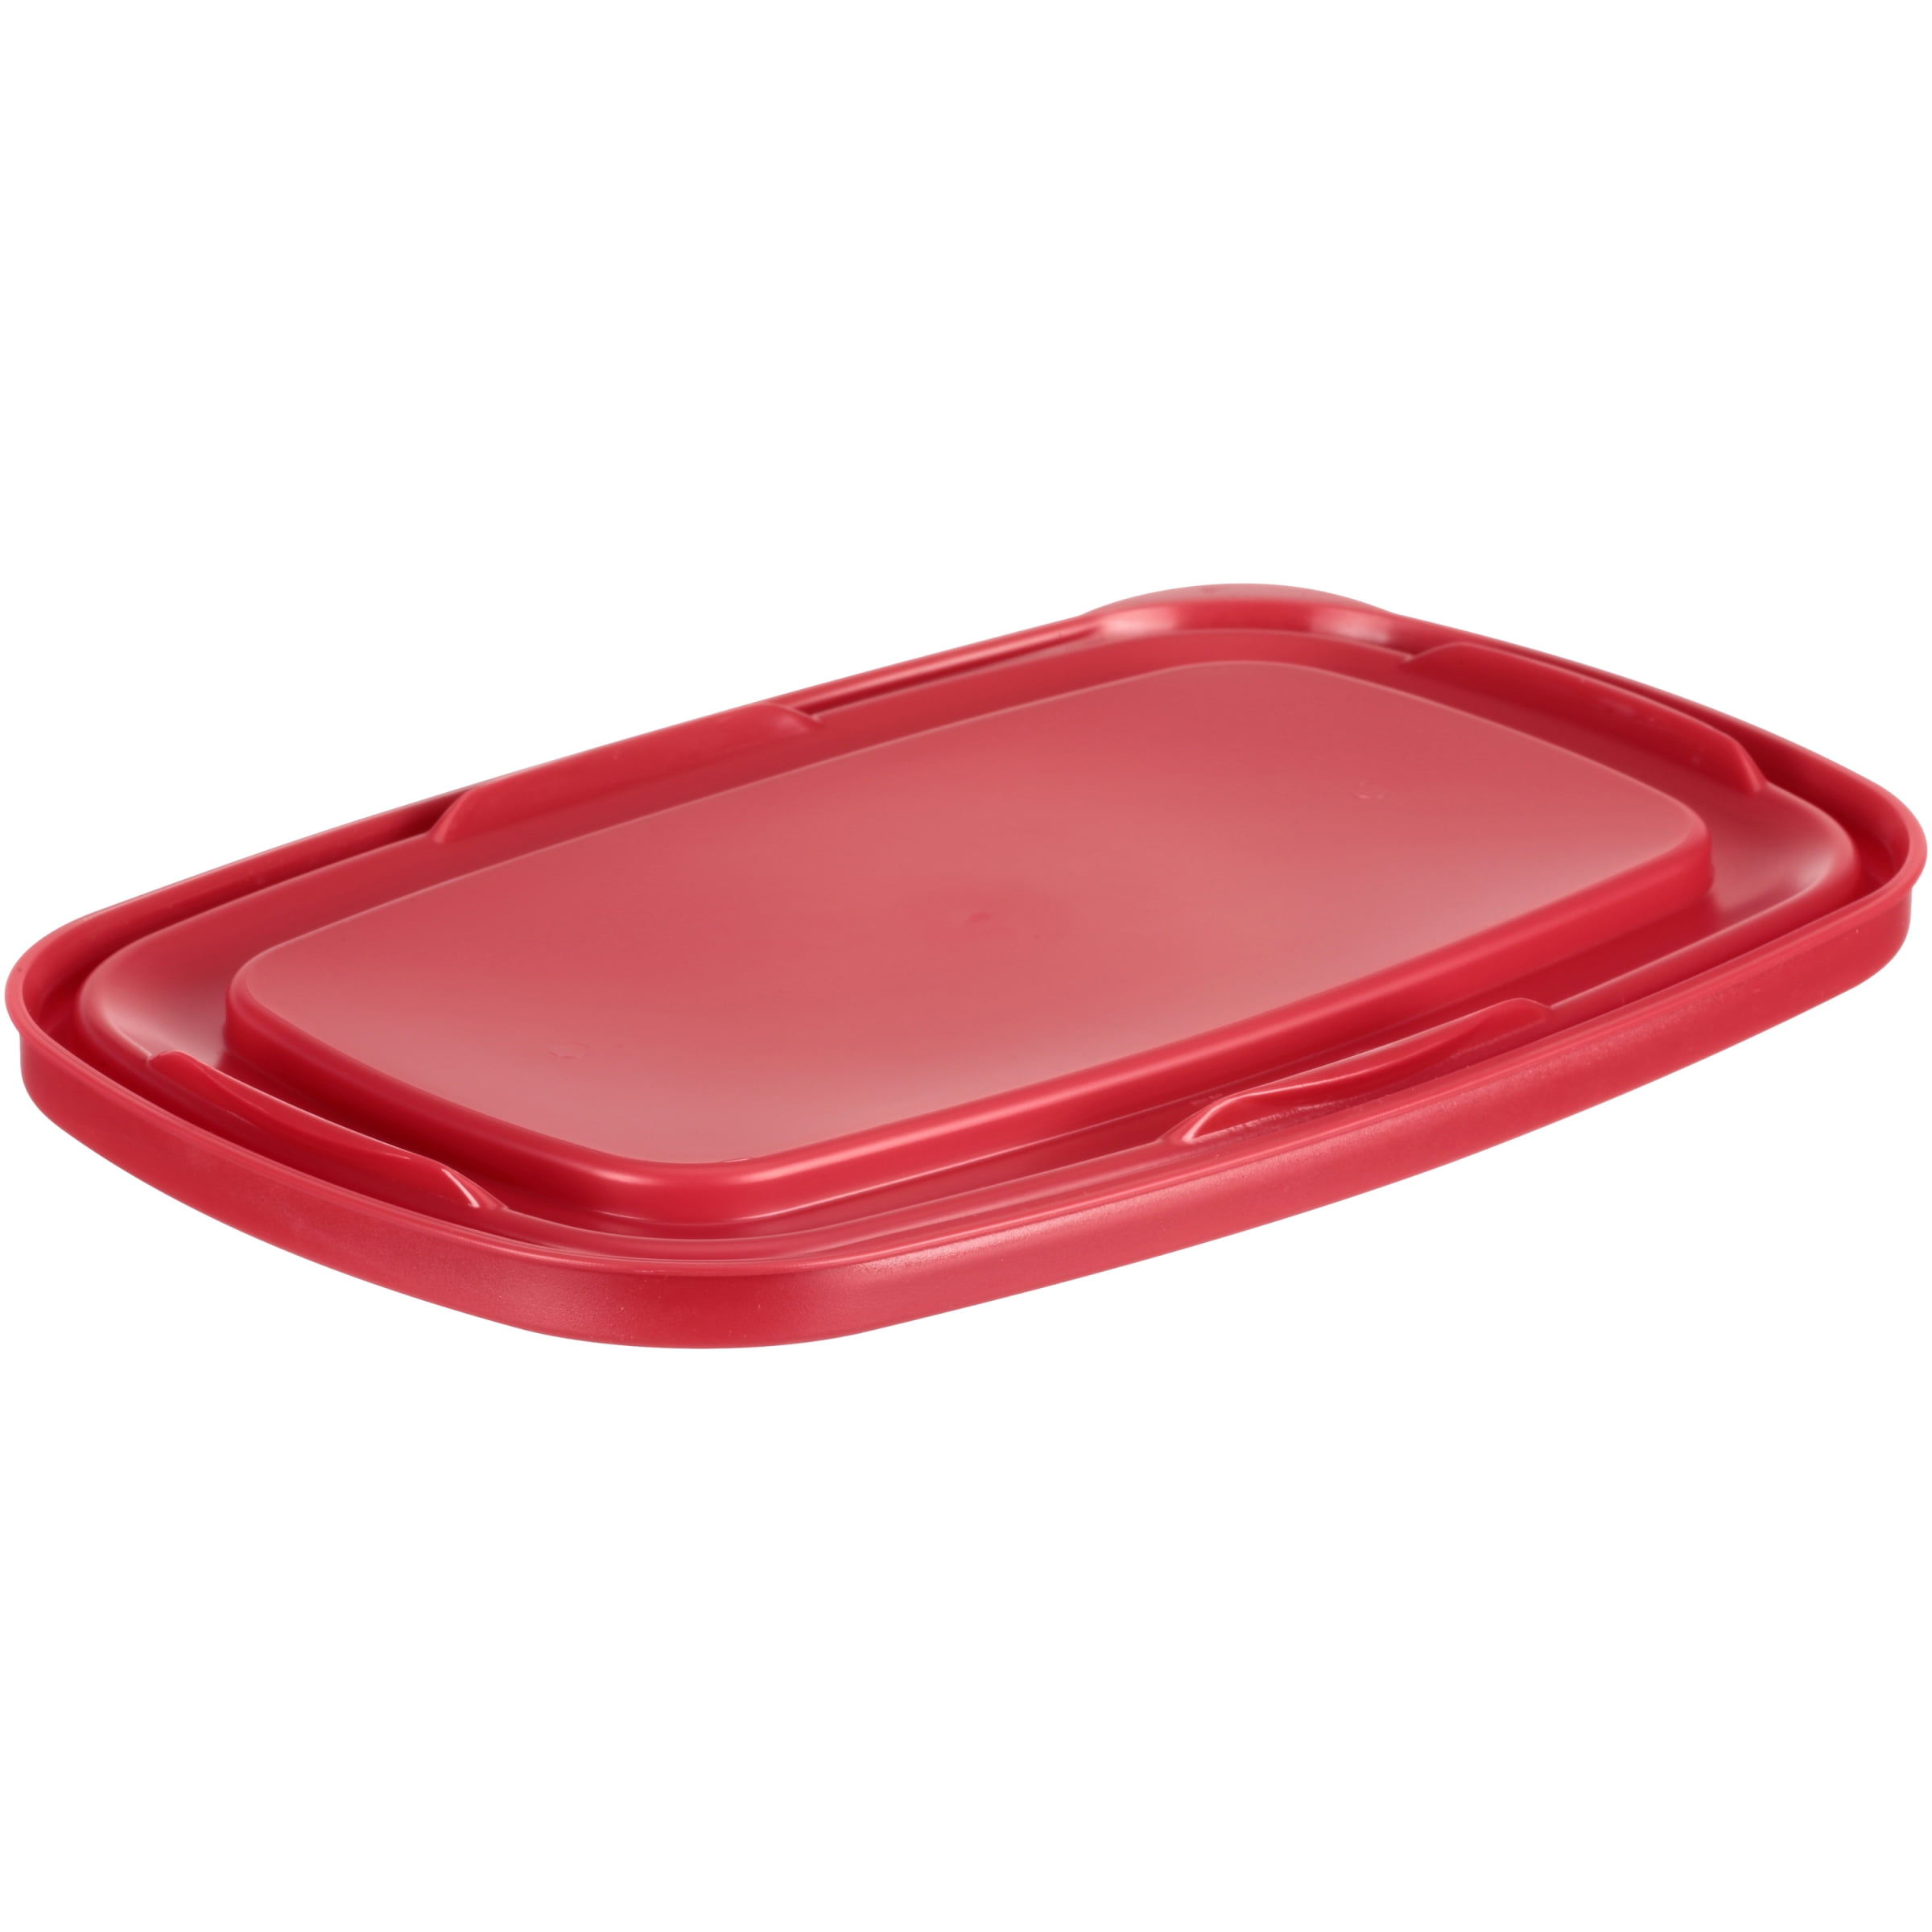 Rubbermaid® EasyFindLids® Vented Food Container - Clear/Racer Red, 56 oz -  Kroger